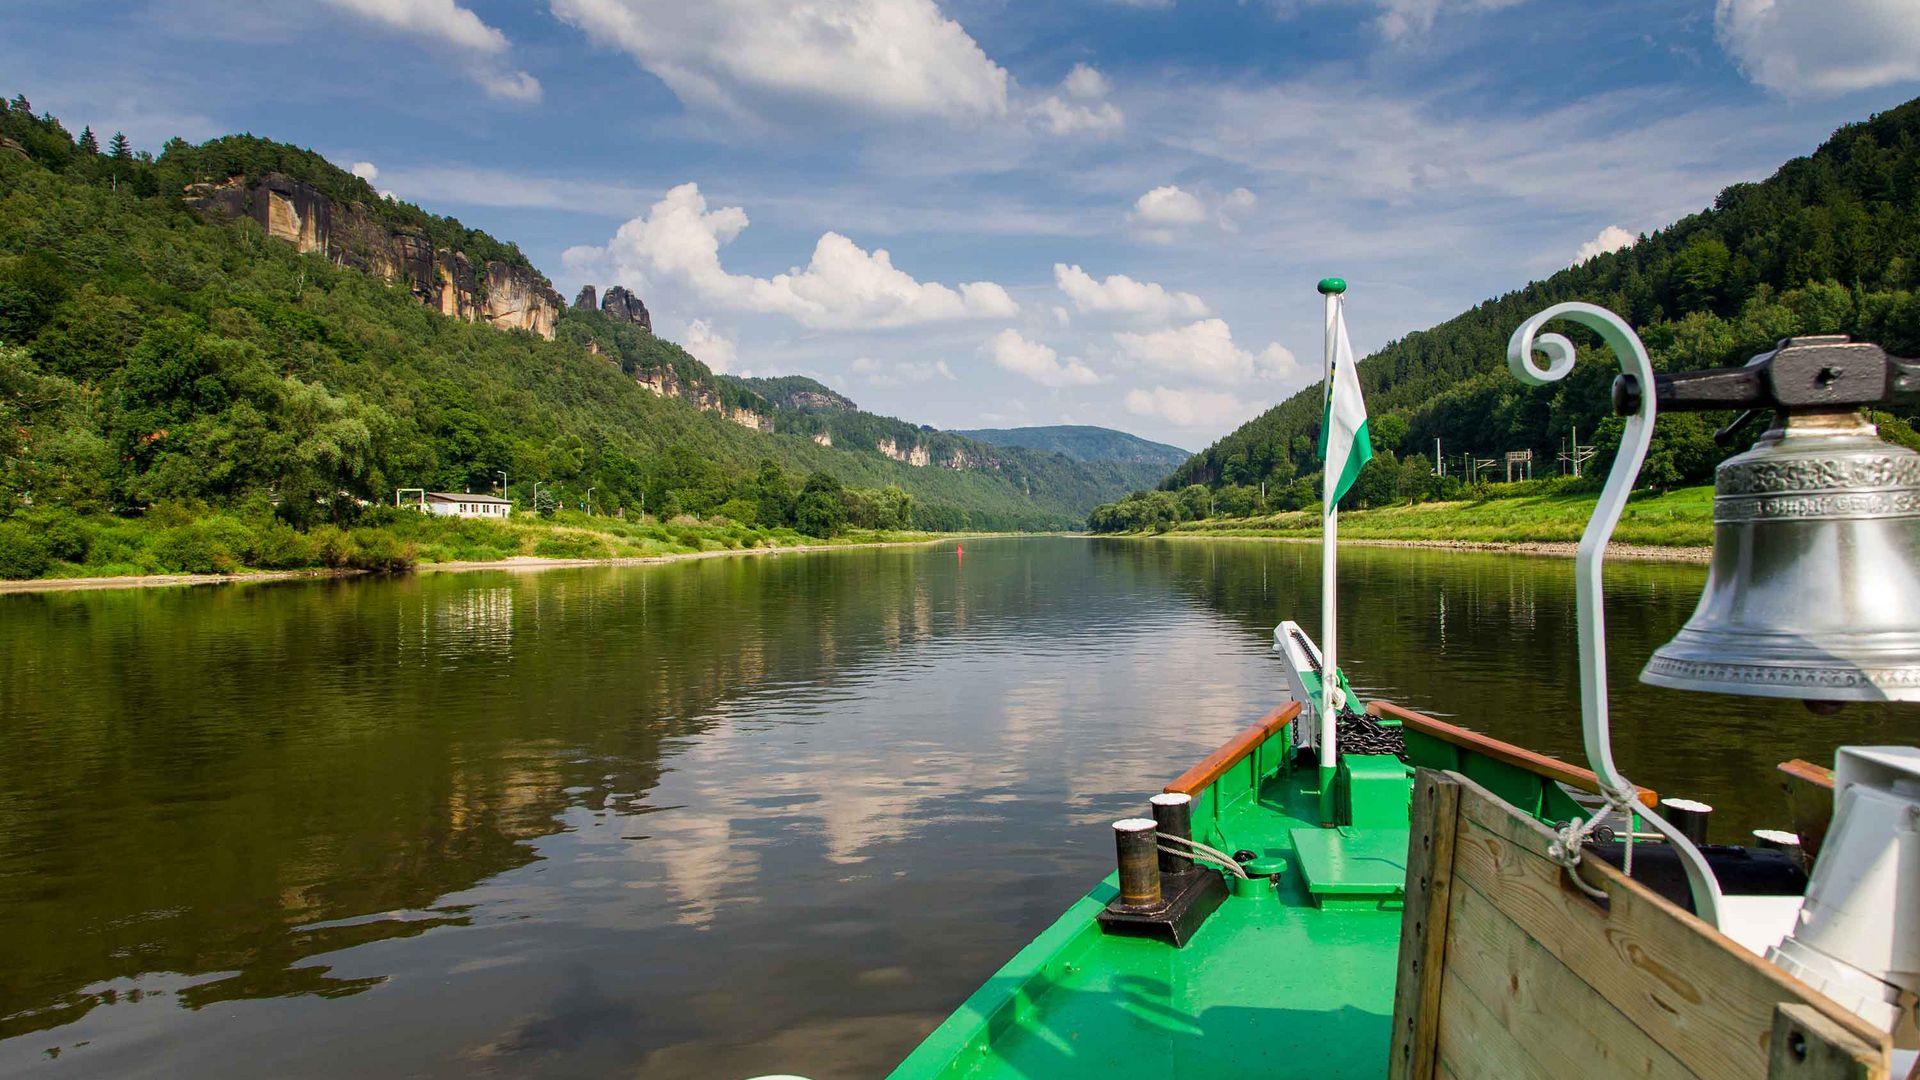 A Steamboat Ride on the Elbe River